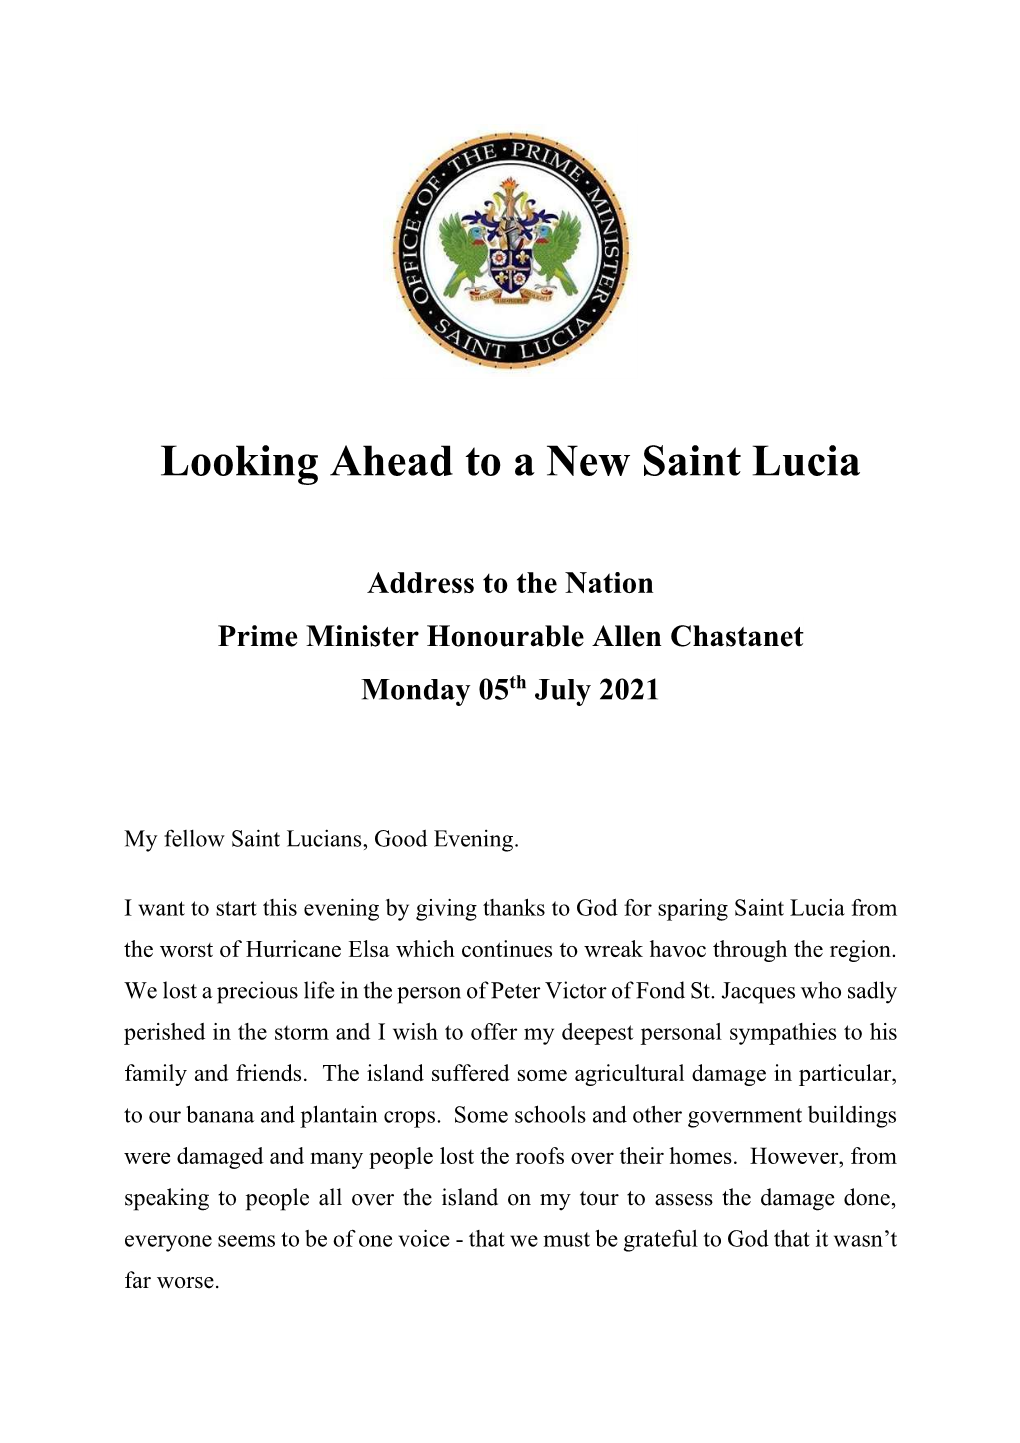 Looking Ahead to a New Saint Lucia